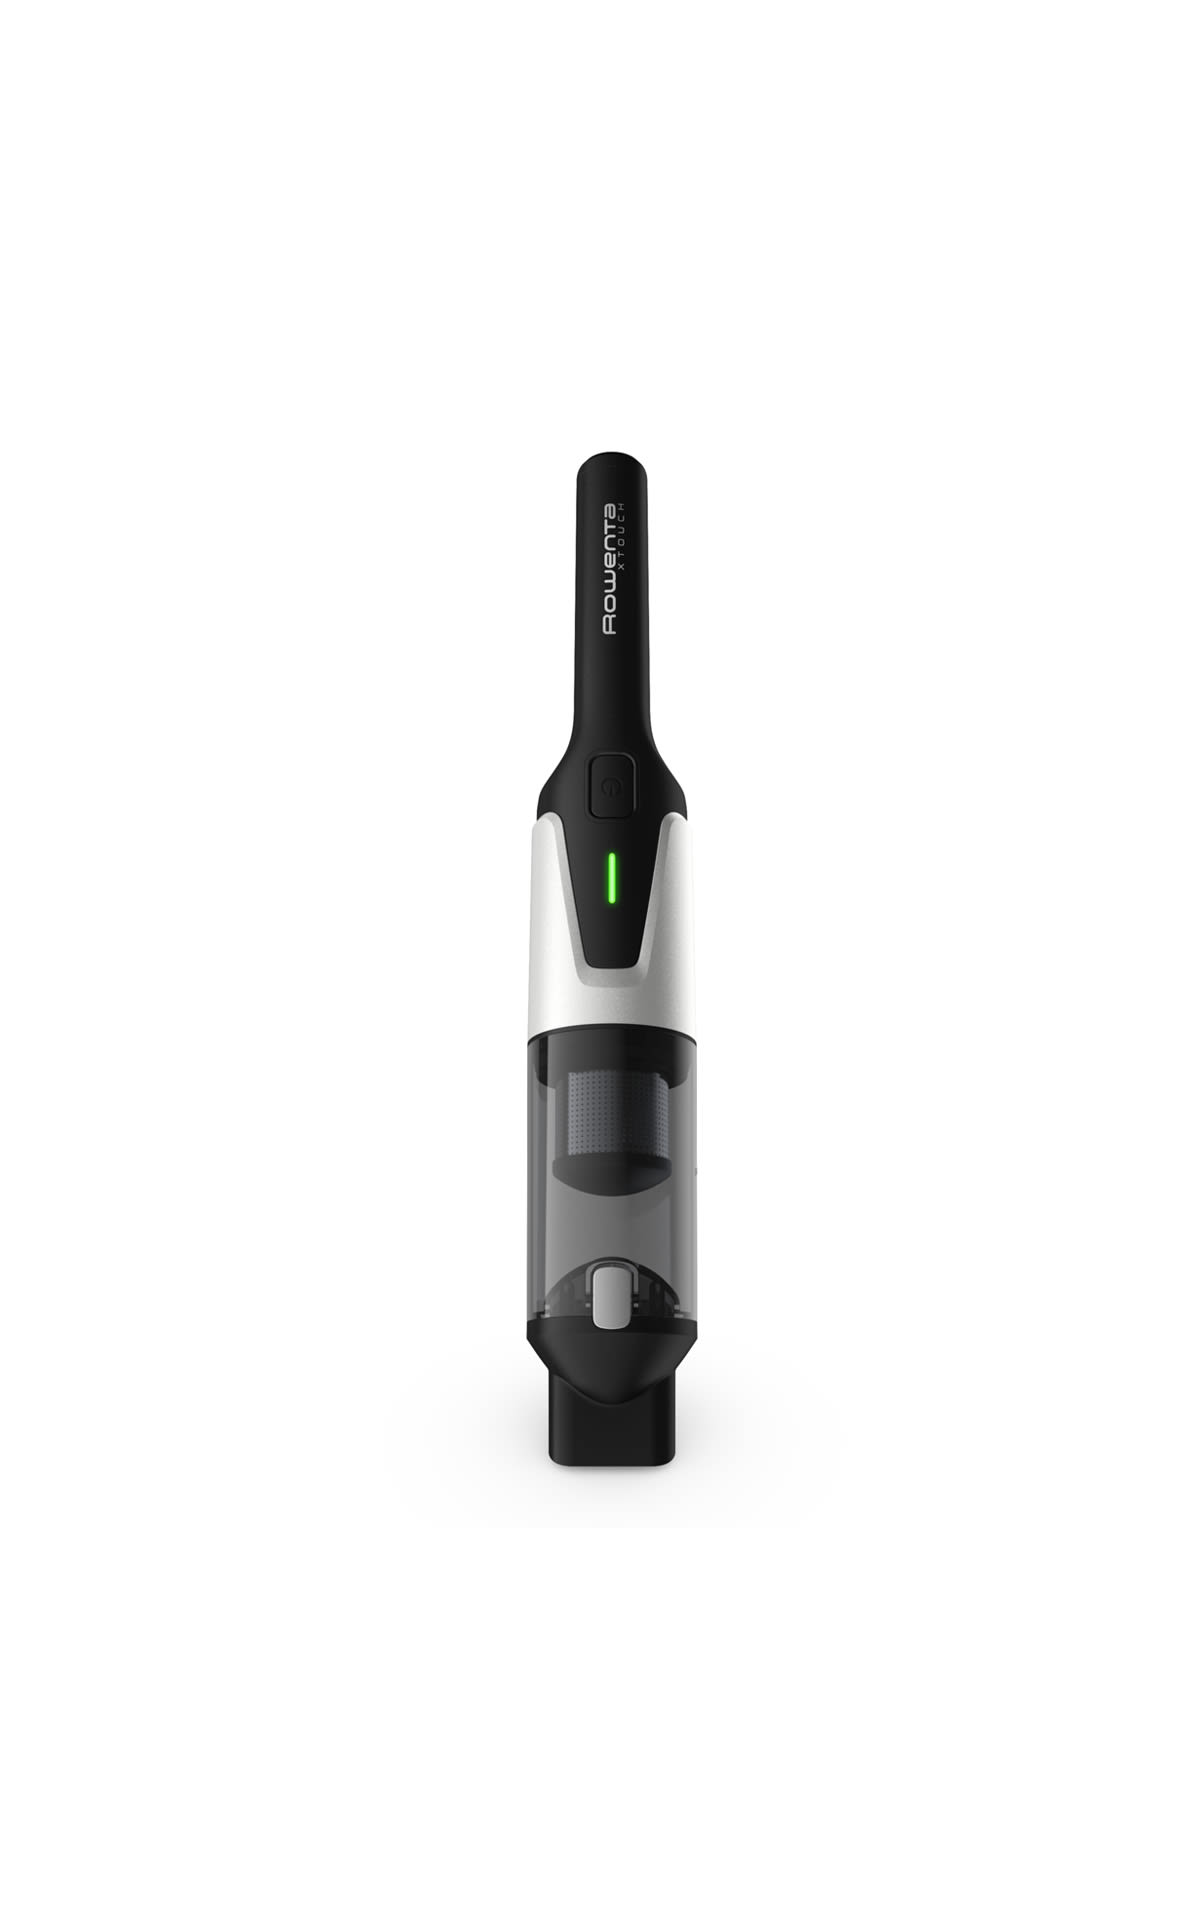 Rowenta X touch vacuum cleaner